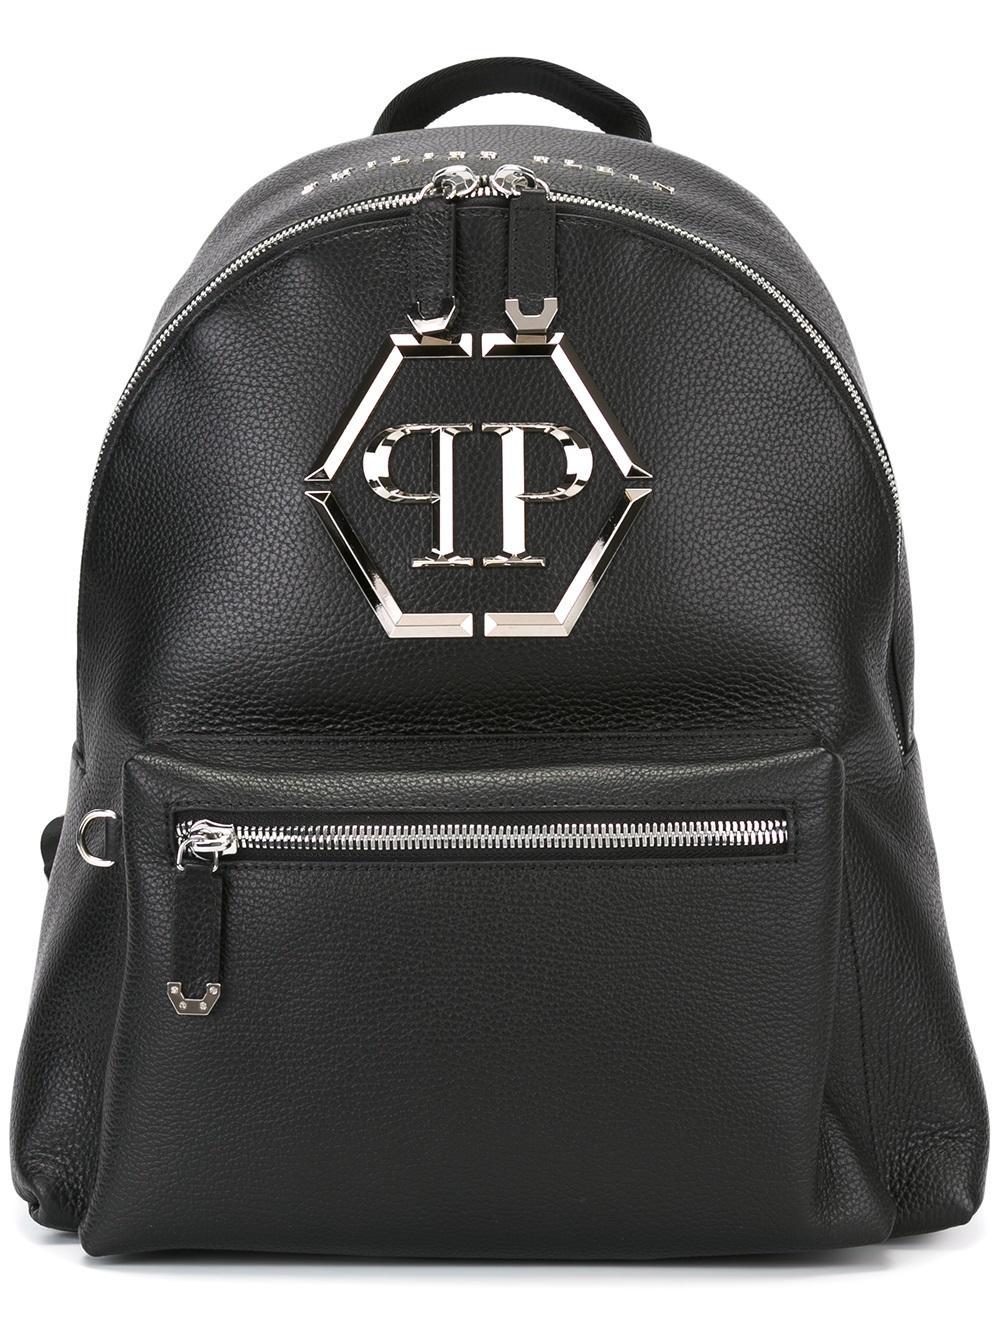 Philipp Plein Leather 'nicosia' Backpack in Black for Men - Lyst